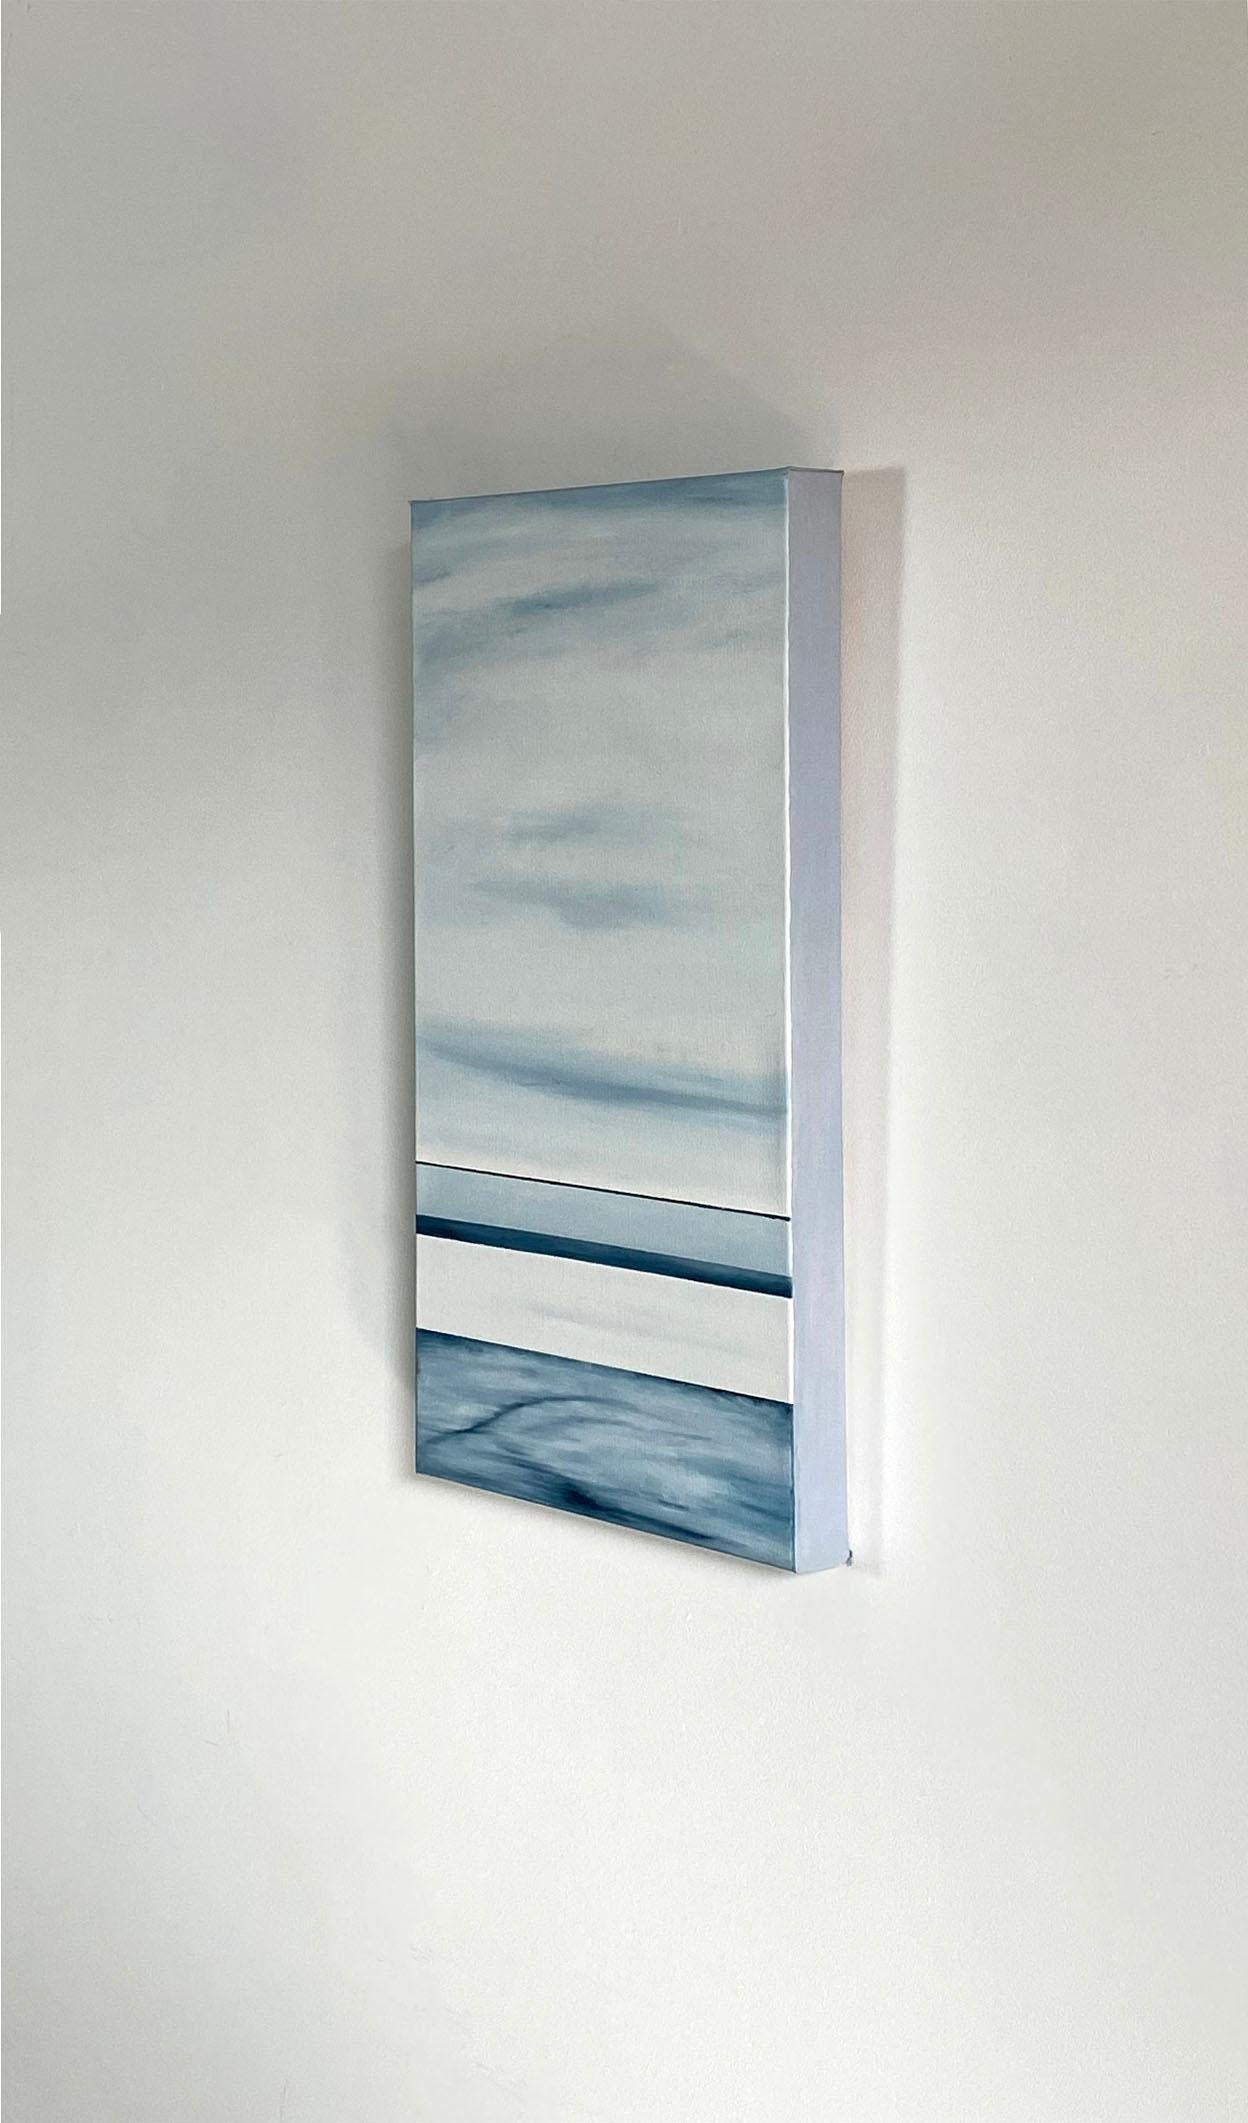 This mid-sized original abstract painting by Tony Iadicicco is made with oil paint on gallery wrapped canvas. Dark blue horizontal lines are located approximately one third of the way up from the bottom of the canvas, with grey and white filling the